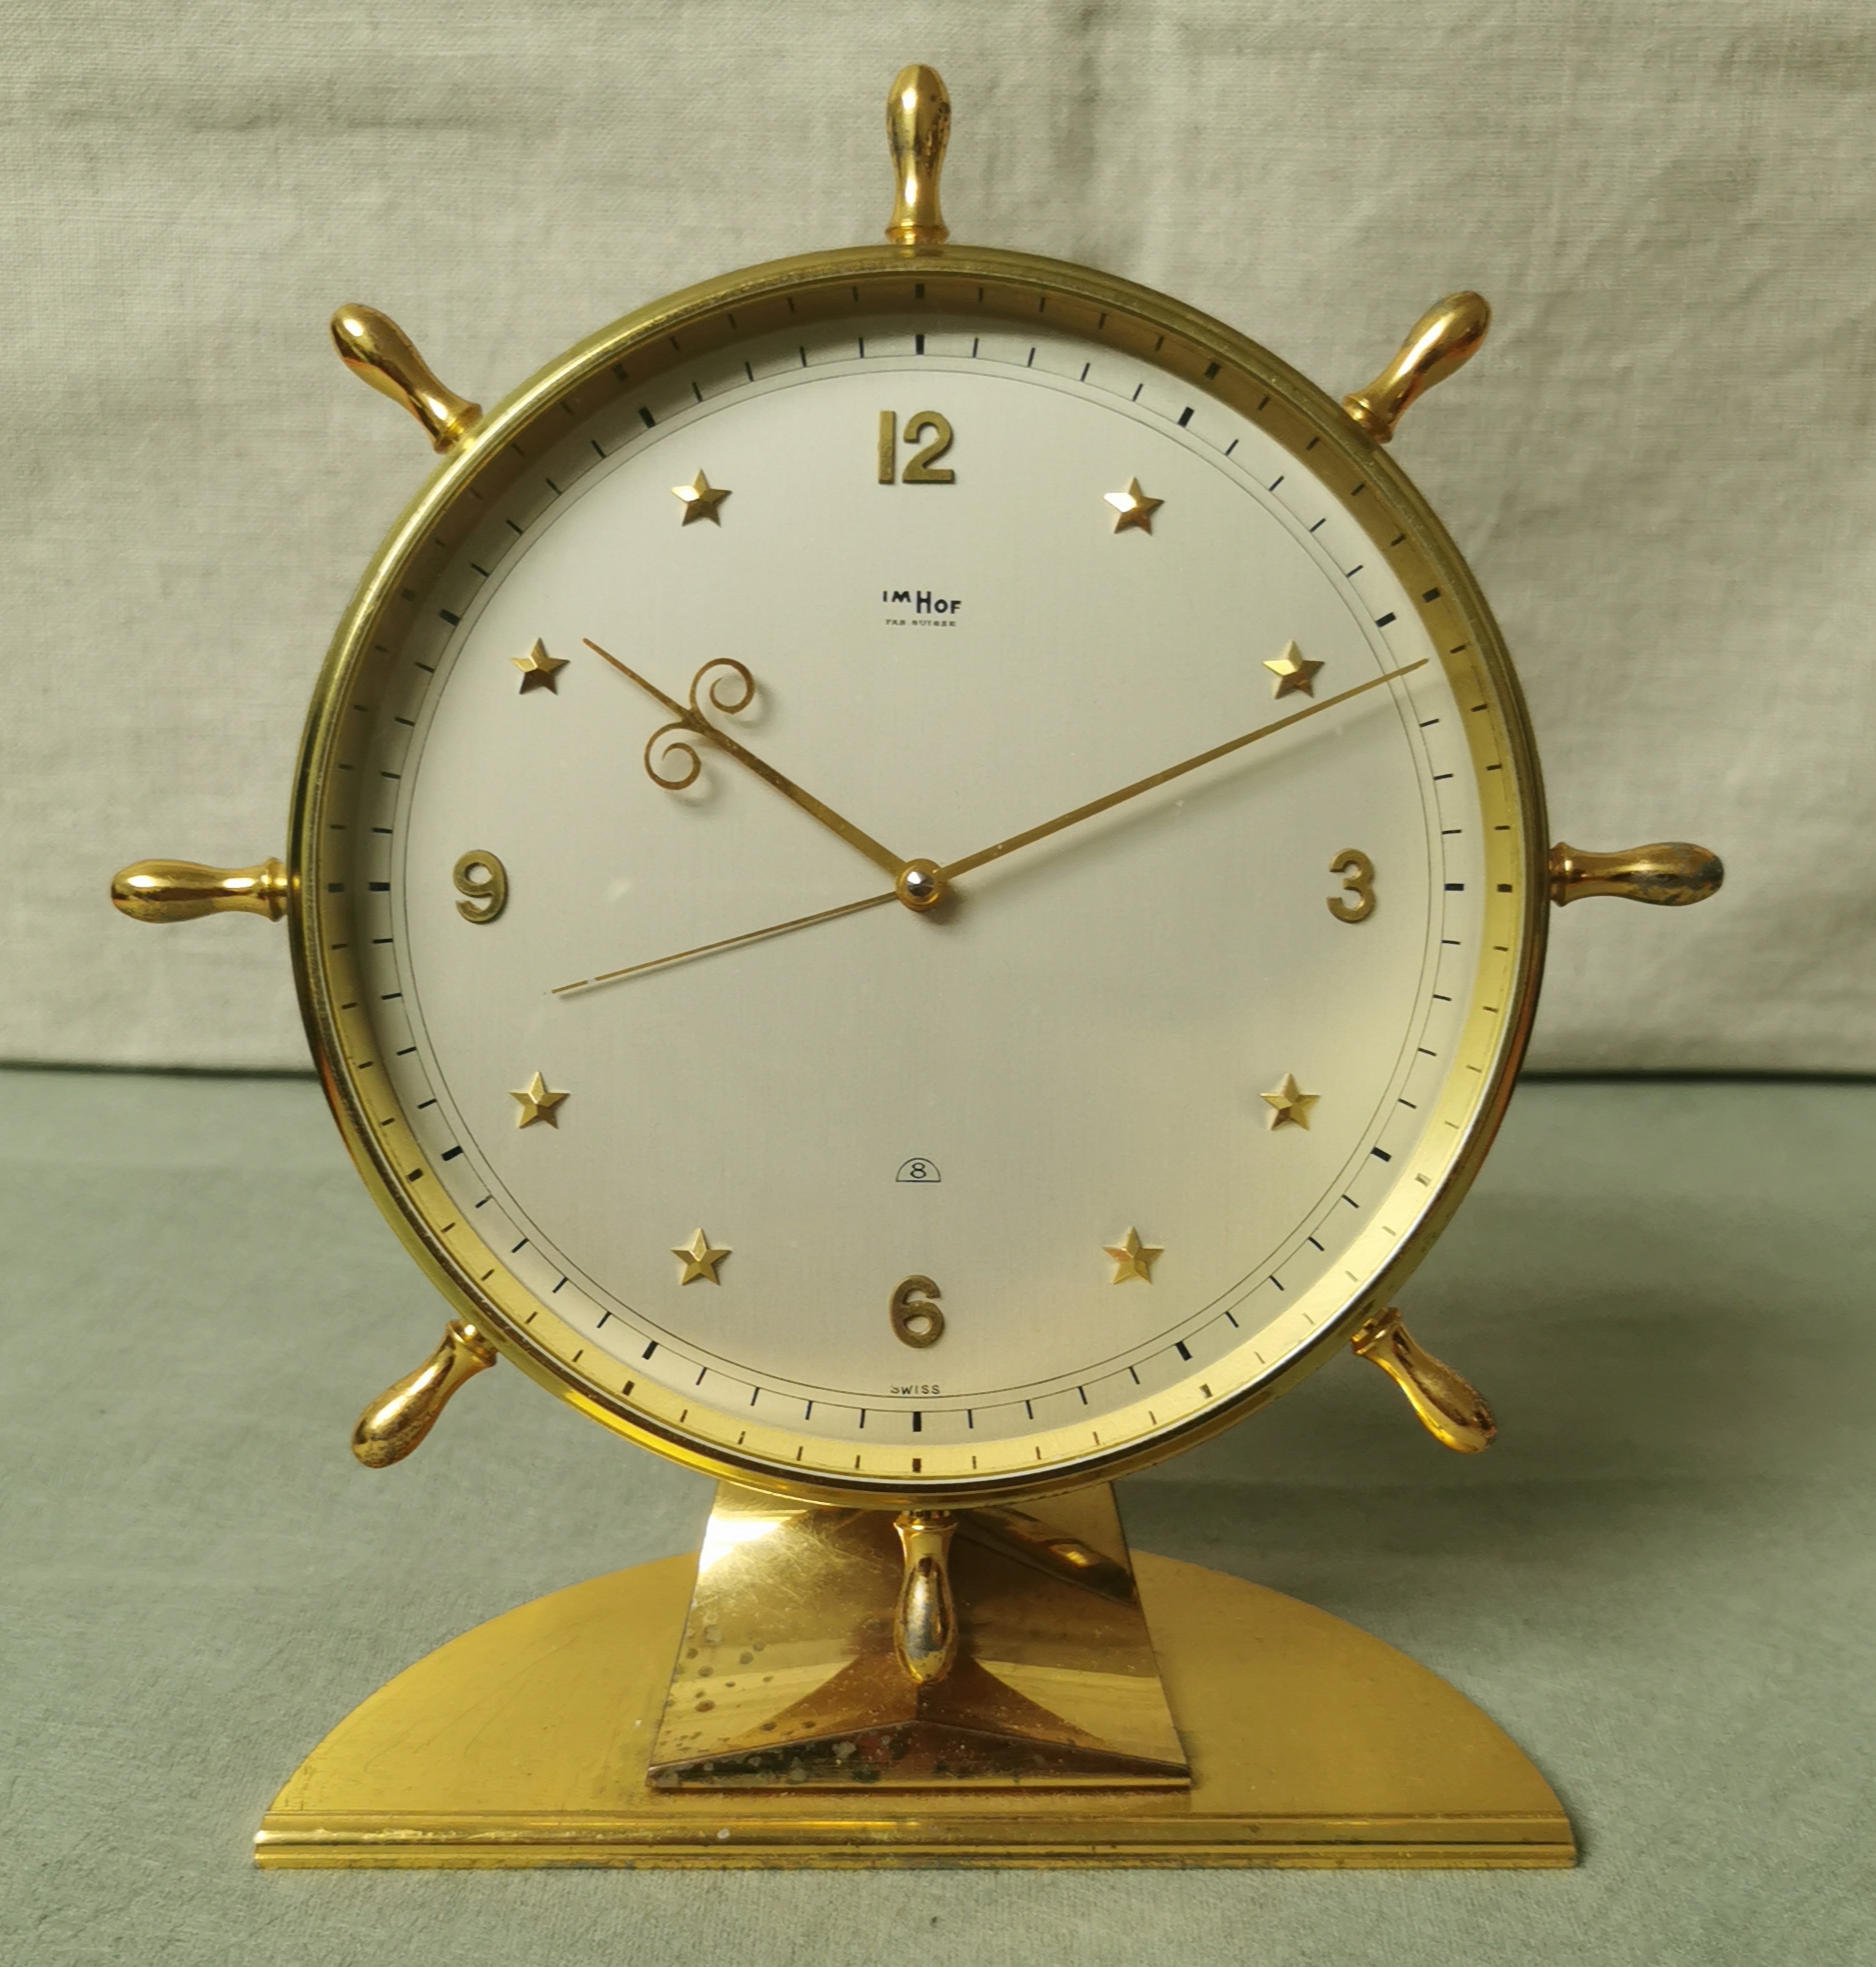 Anonimo Imhof 8-days 15 Jewels Swiss Wind-up Table Clock Brass Silver Dial - 1960s | San Giorgio a Cremano